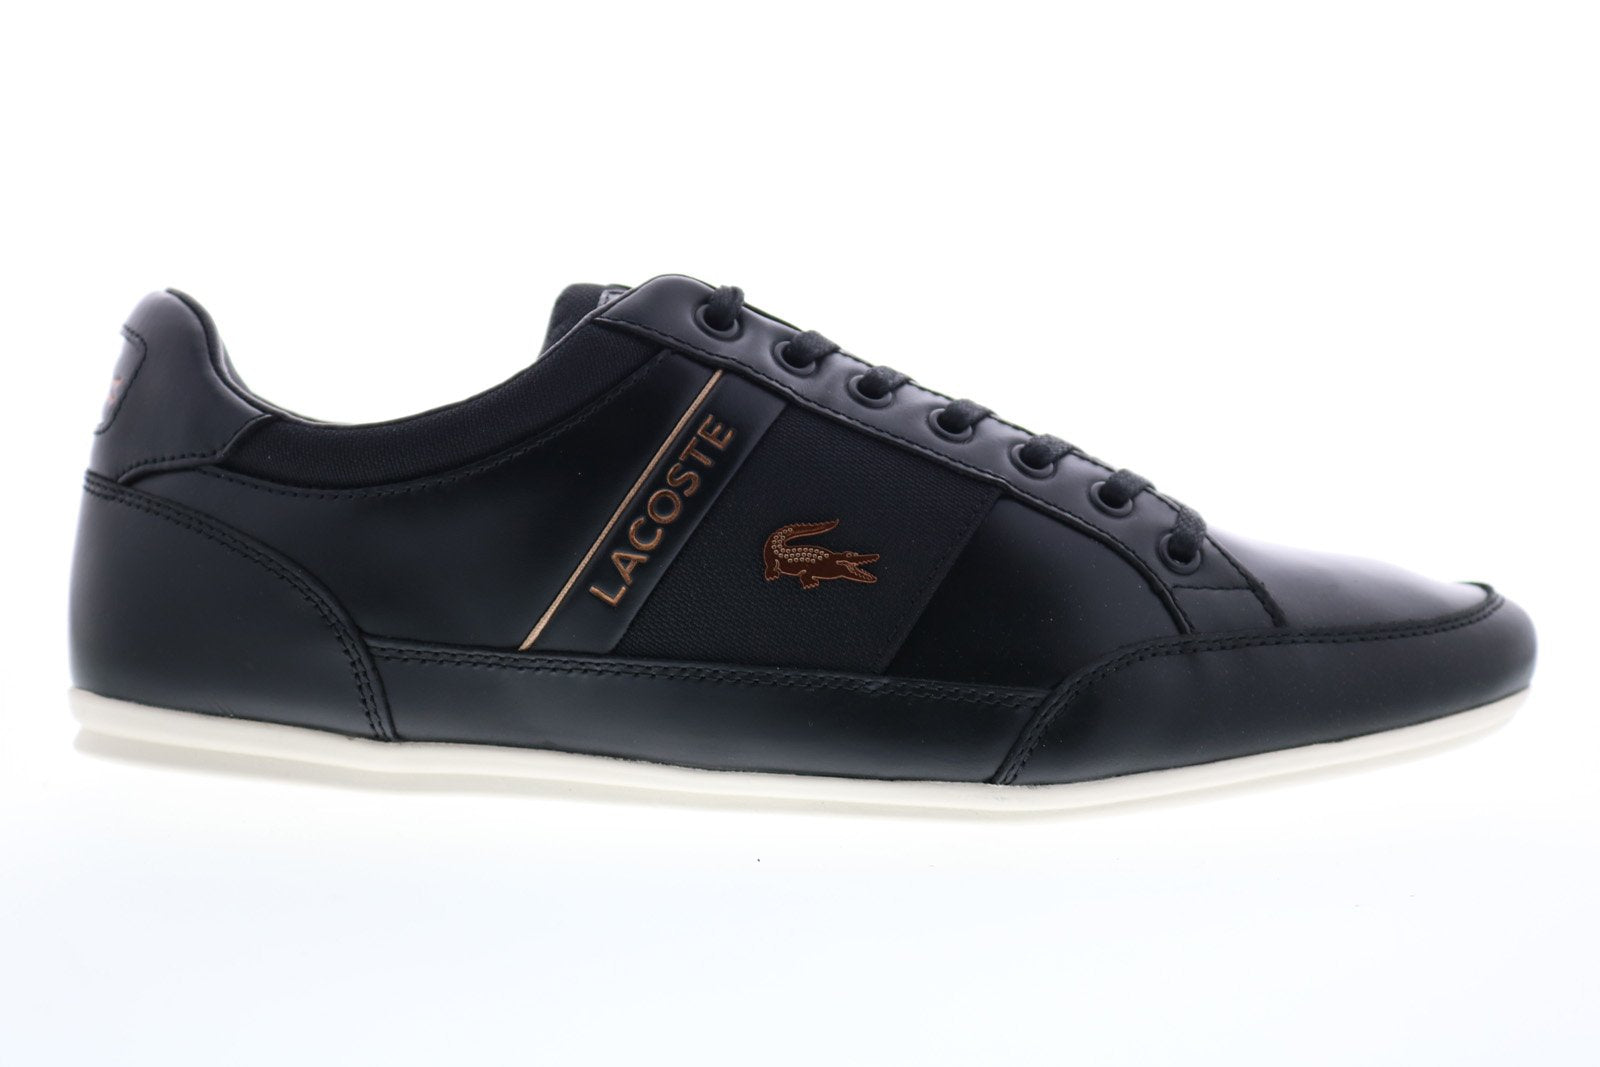 Lacoste Chaymon 318 7 U Mens Black Leather Up Lifestyle Sneakers - Shoes